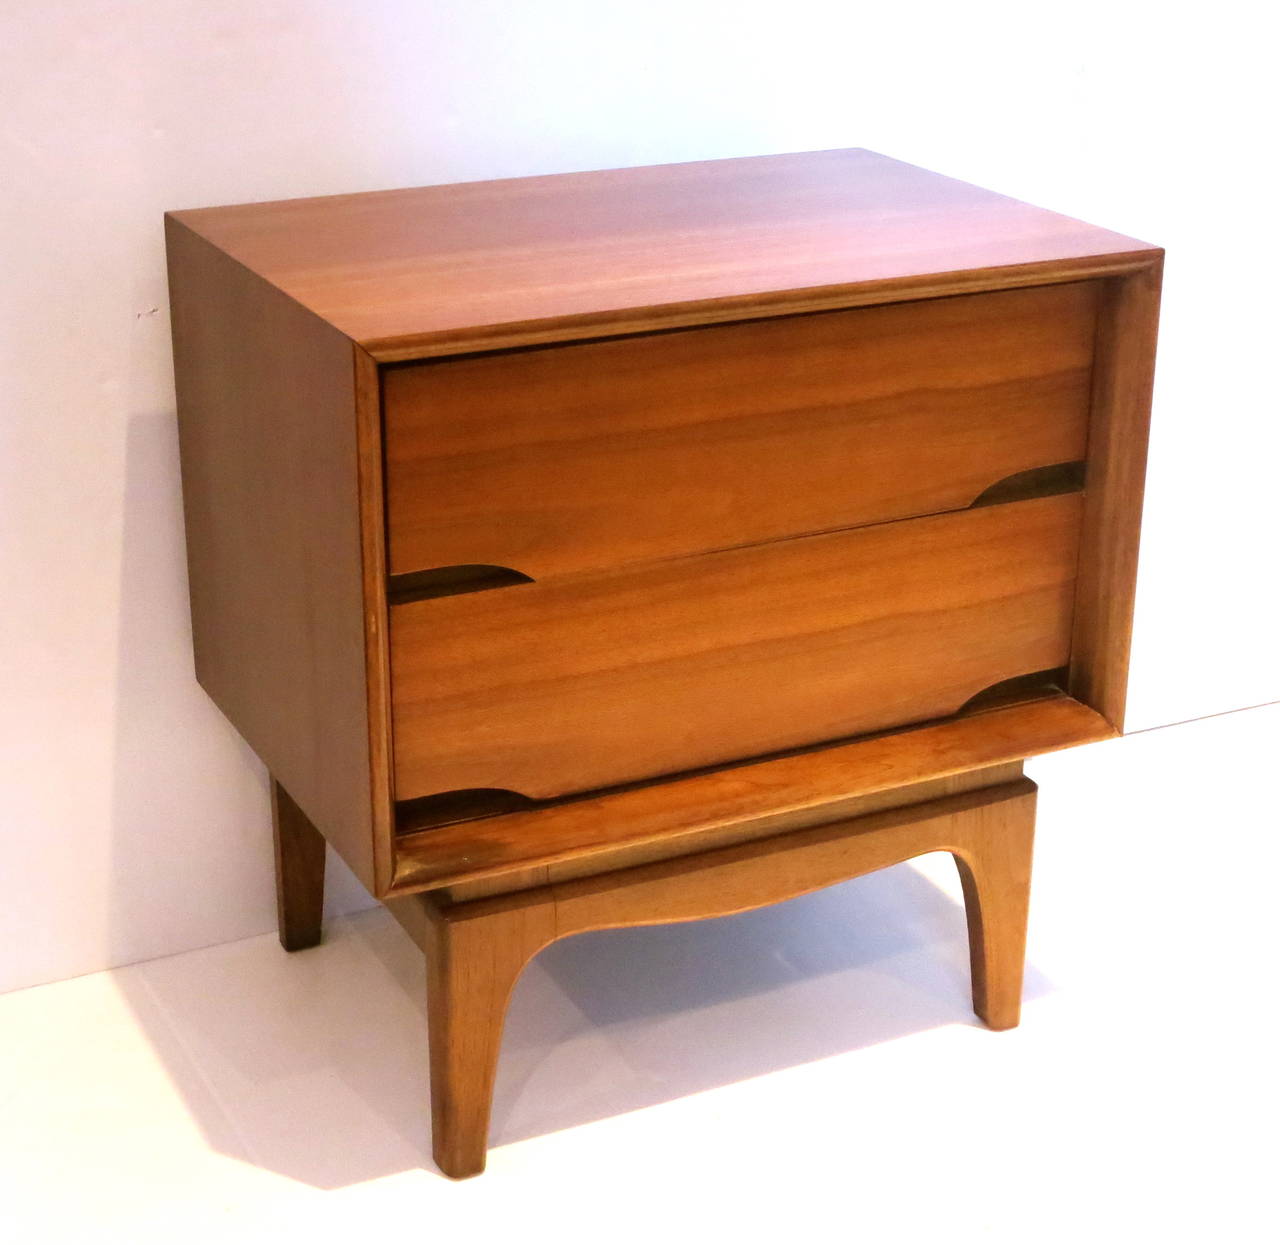 Walnut 1950s American modern Pair of double drawer walnut night stands by Kent Coffey